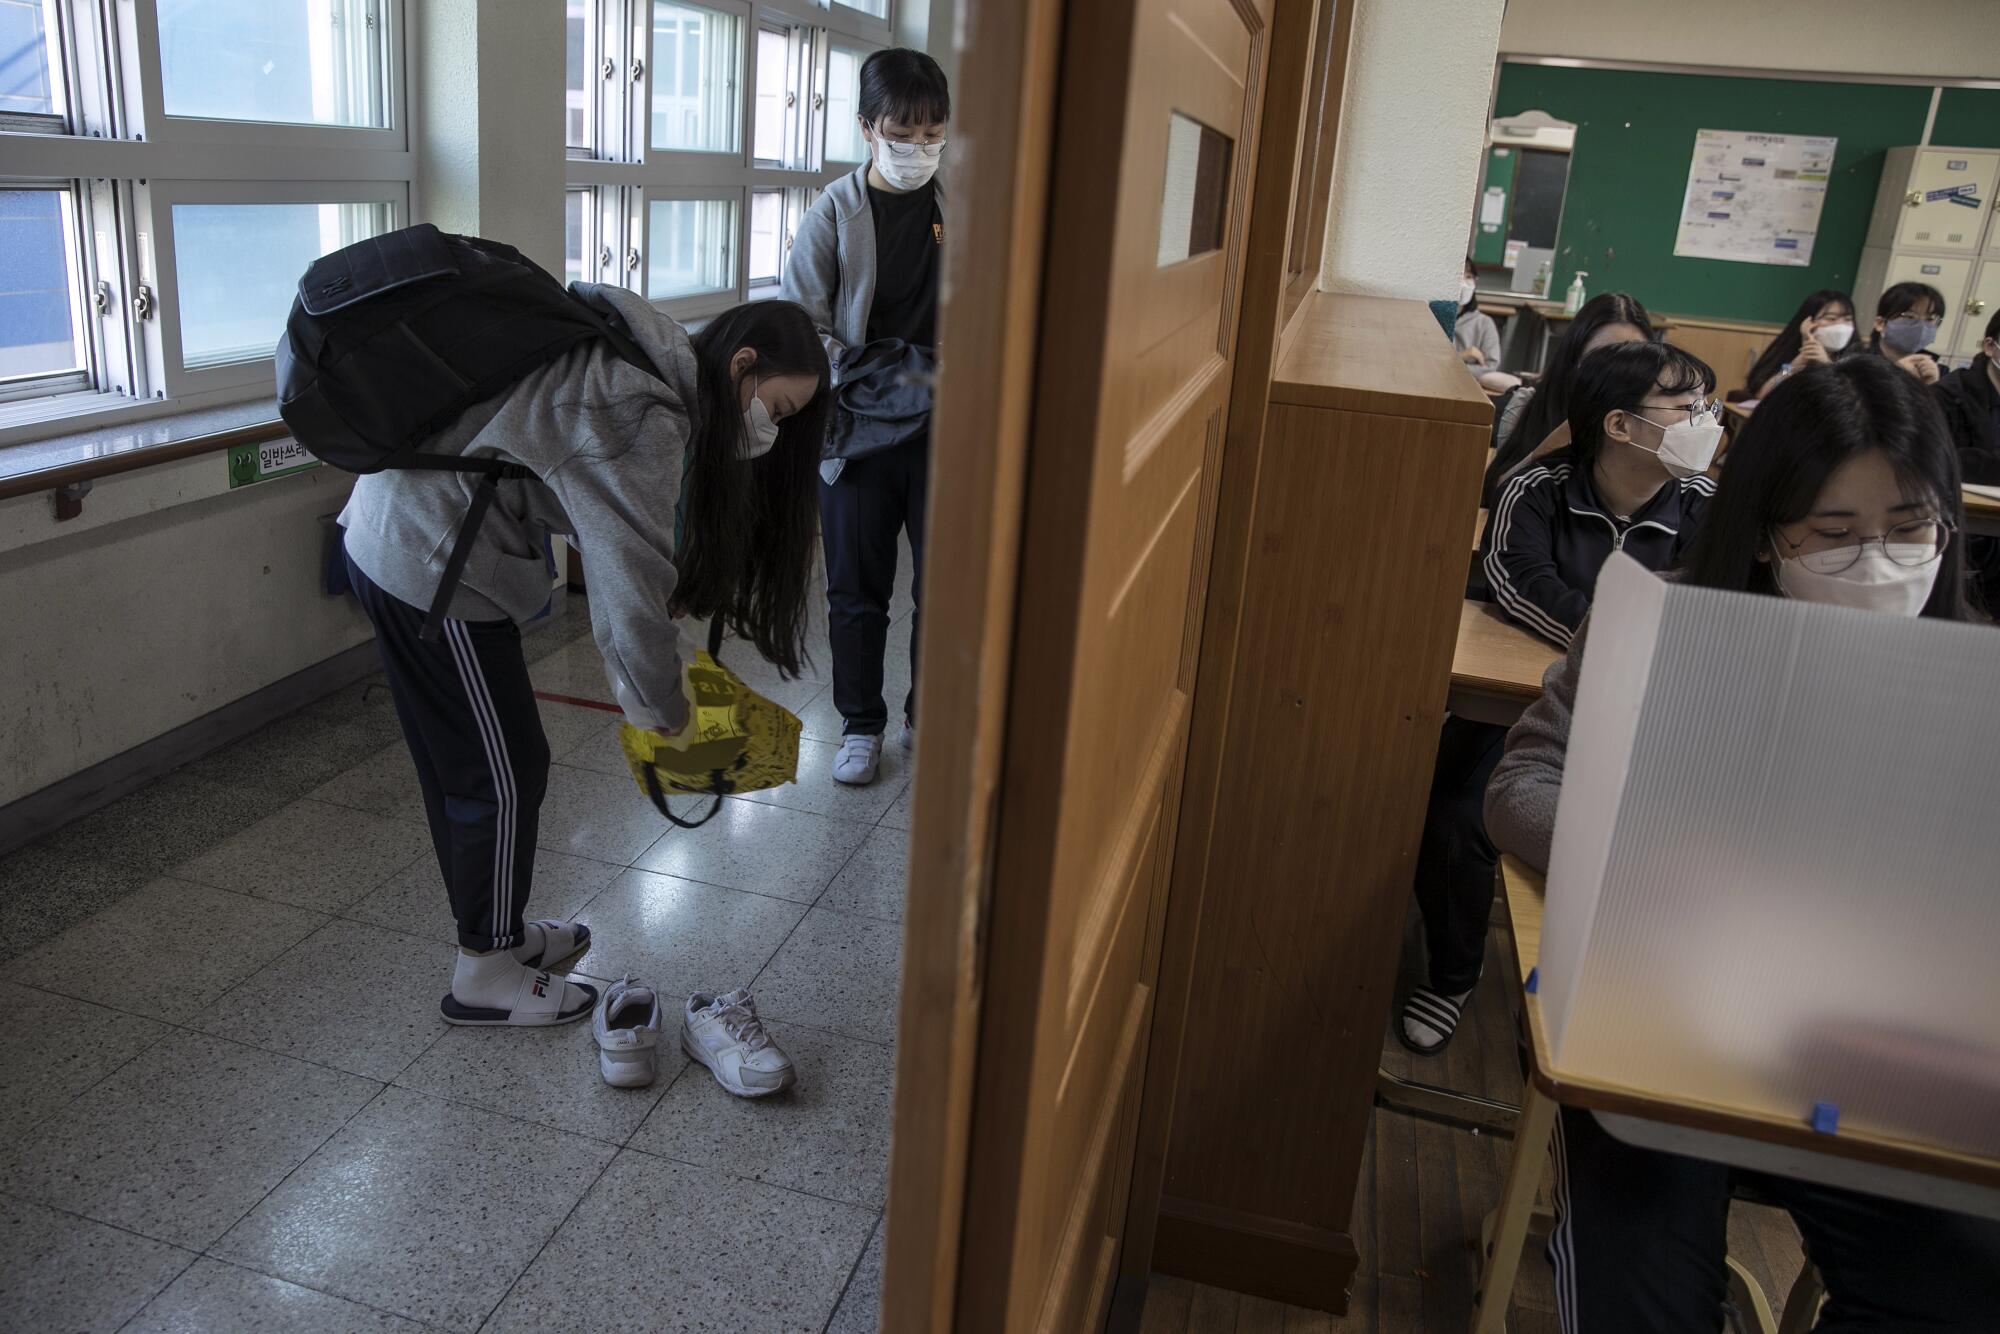 Students get ready for class at Gyungbuk Girls' High School in Daegu, South Korea, on May 20, 2020.